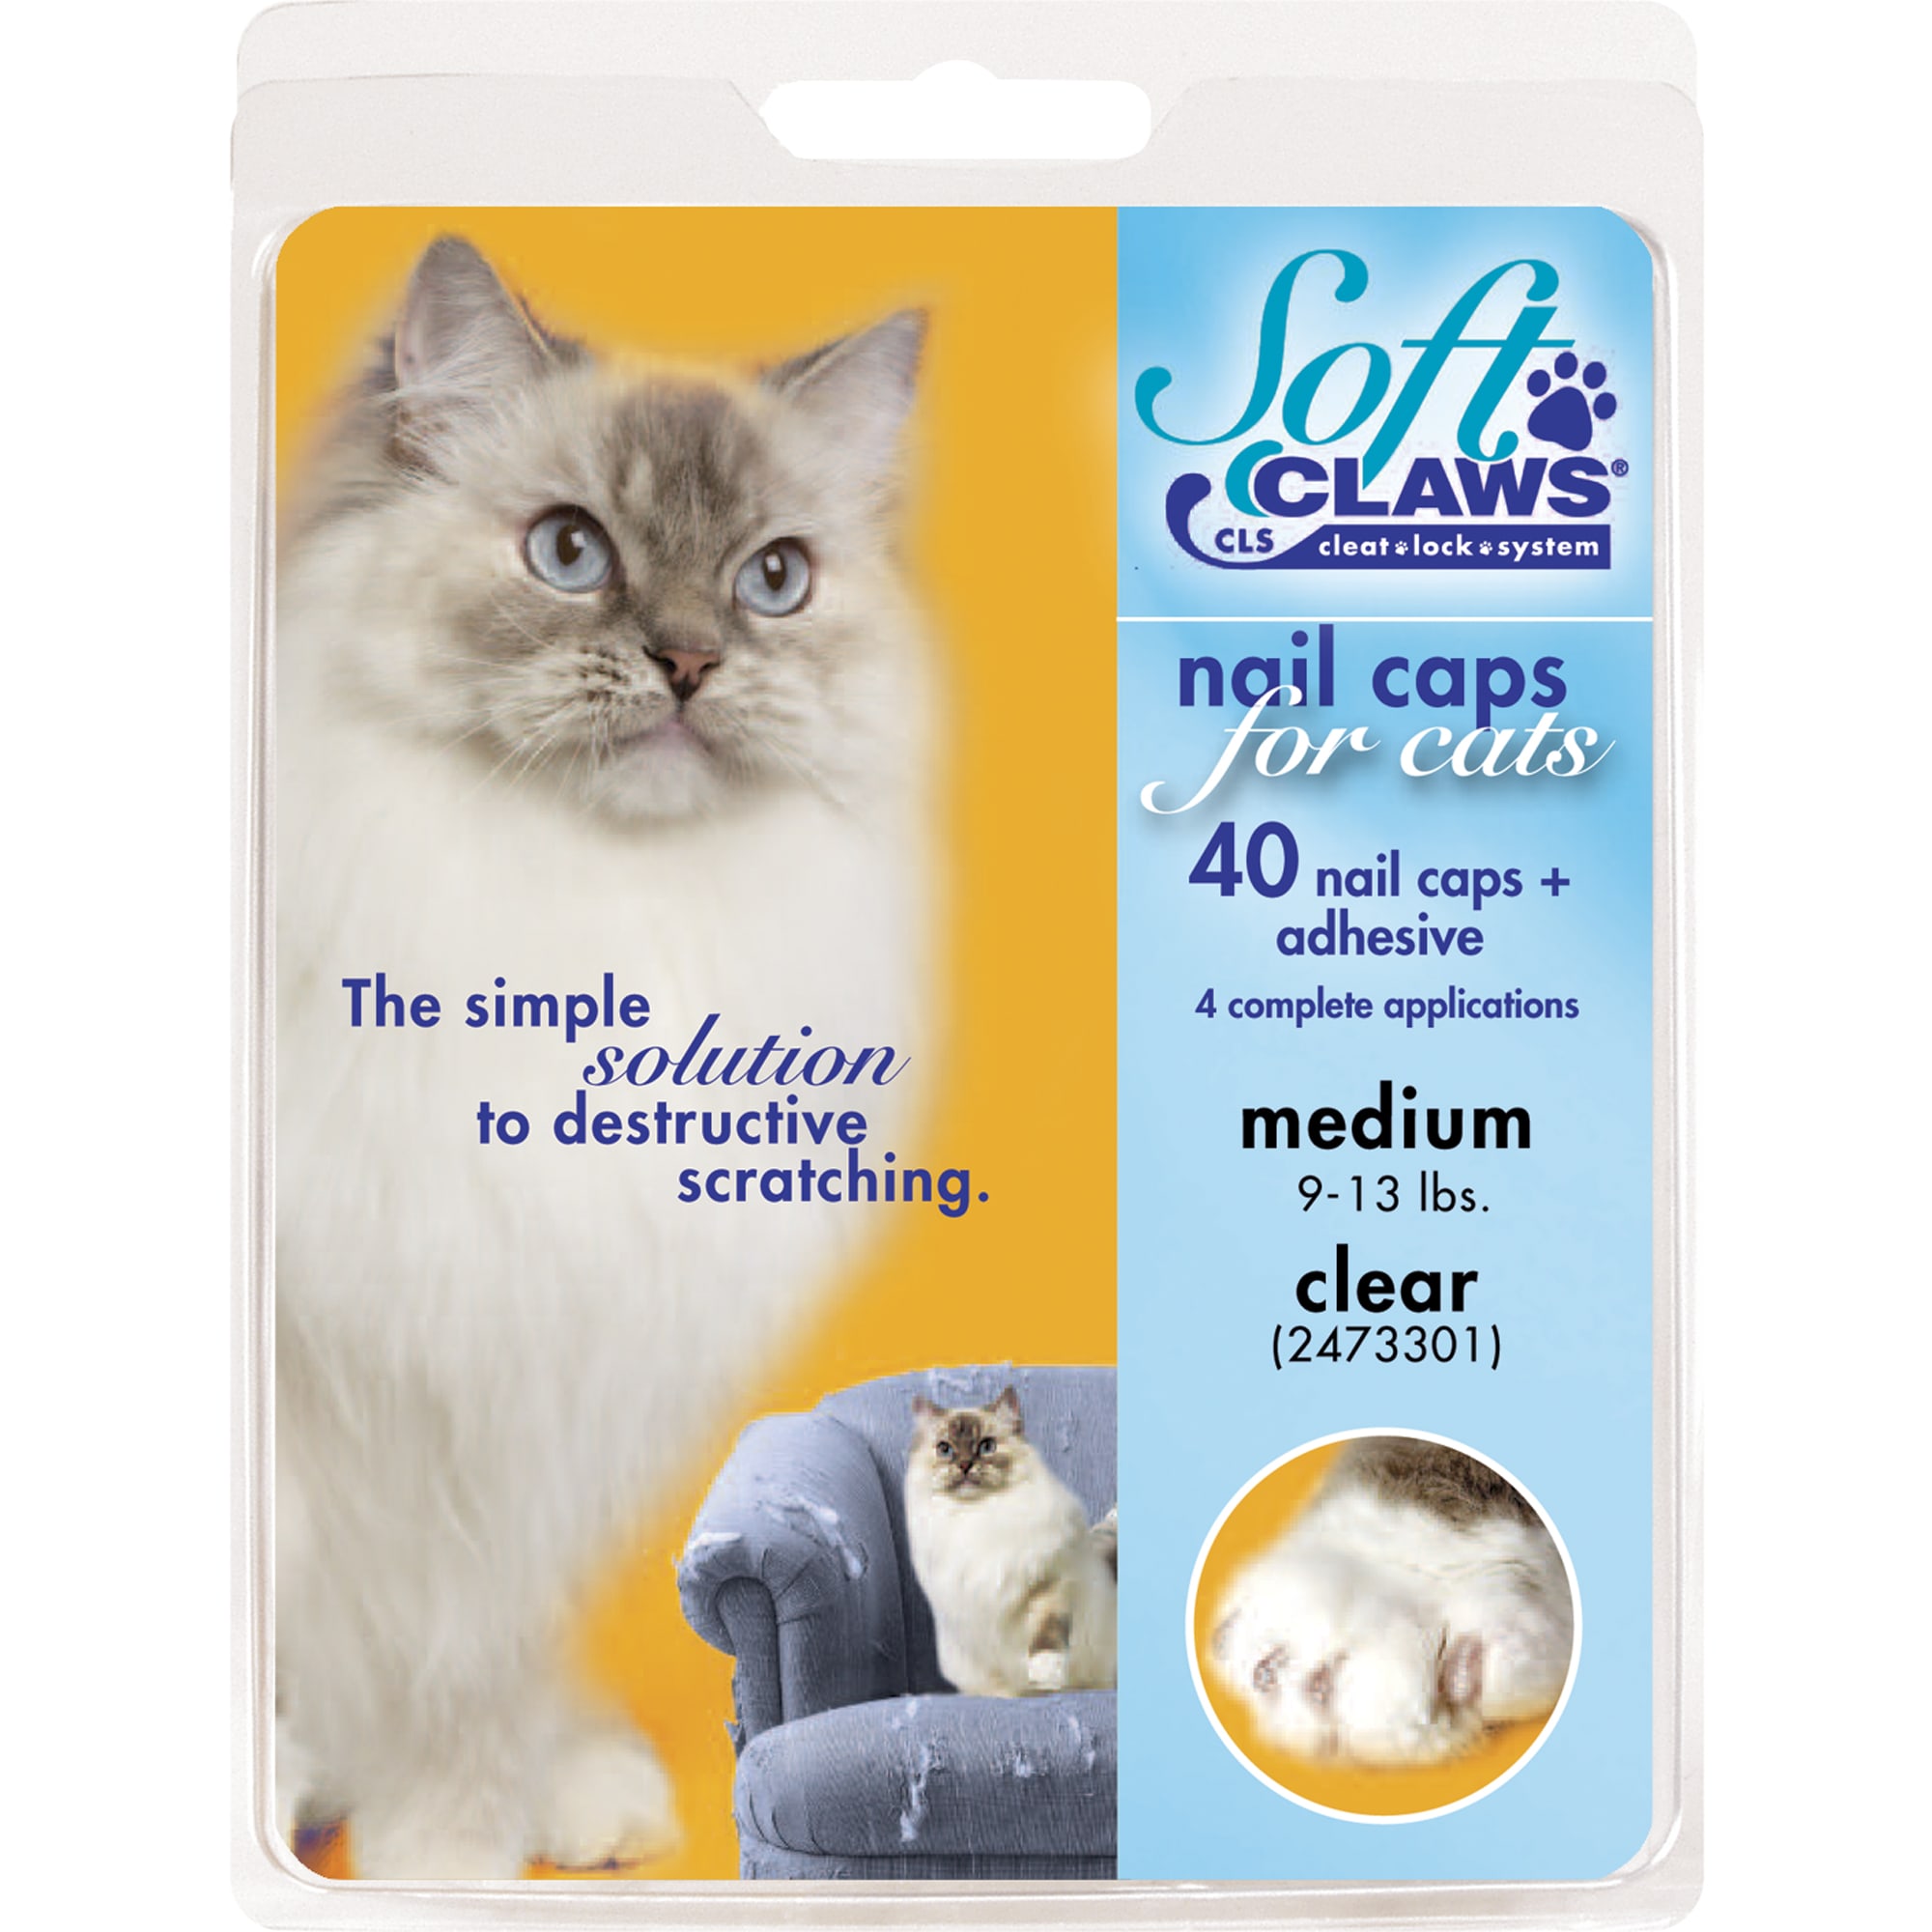 X-SMALL to LARGE * XMAS SOFT CLAWS NAIL CAPS FOR CATS PAWS PEDI-CAT CAPS 